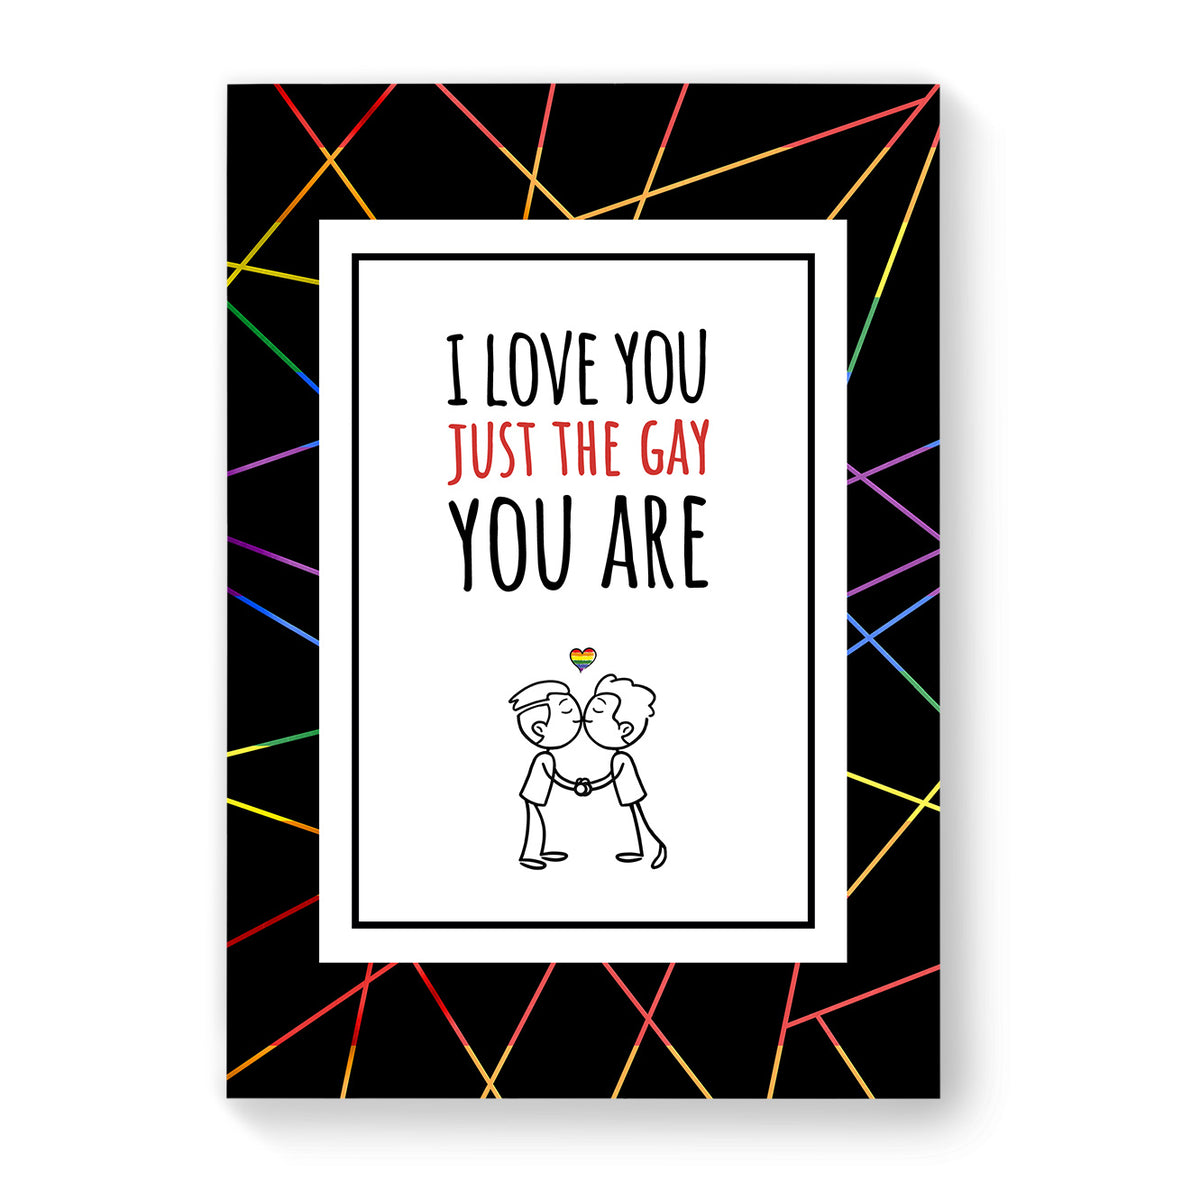 I love you just the gay you are - Gay Couple Card - Black Geometric | Gift